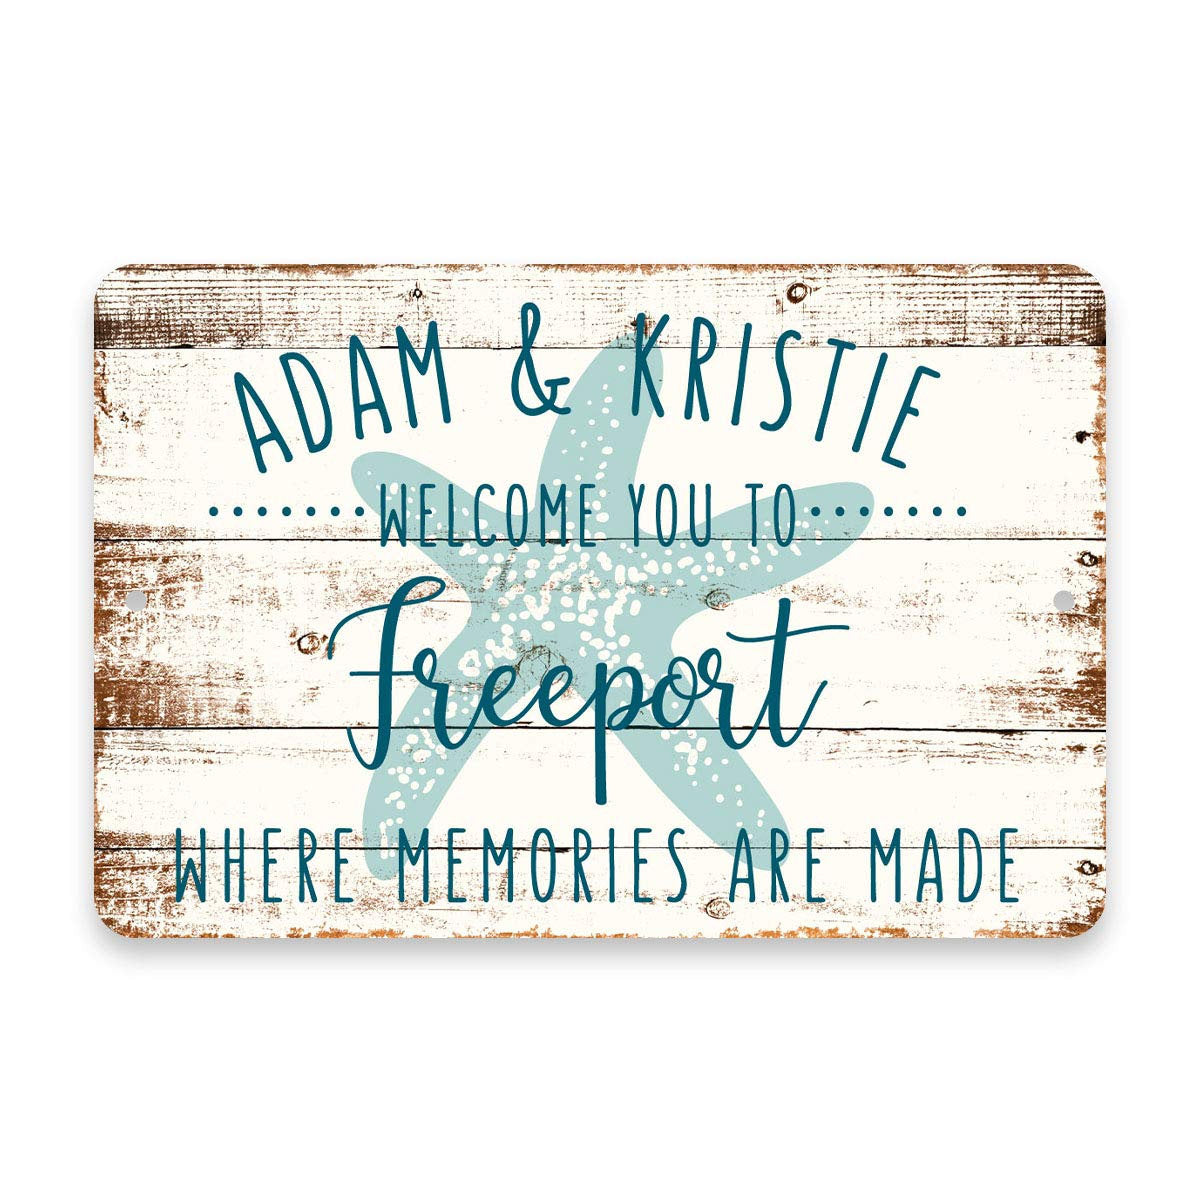 Personalized Welcome to Freeport Where Memories are Made Sign - 8 X 12 Metal Sign with Wood Look